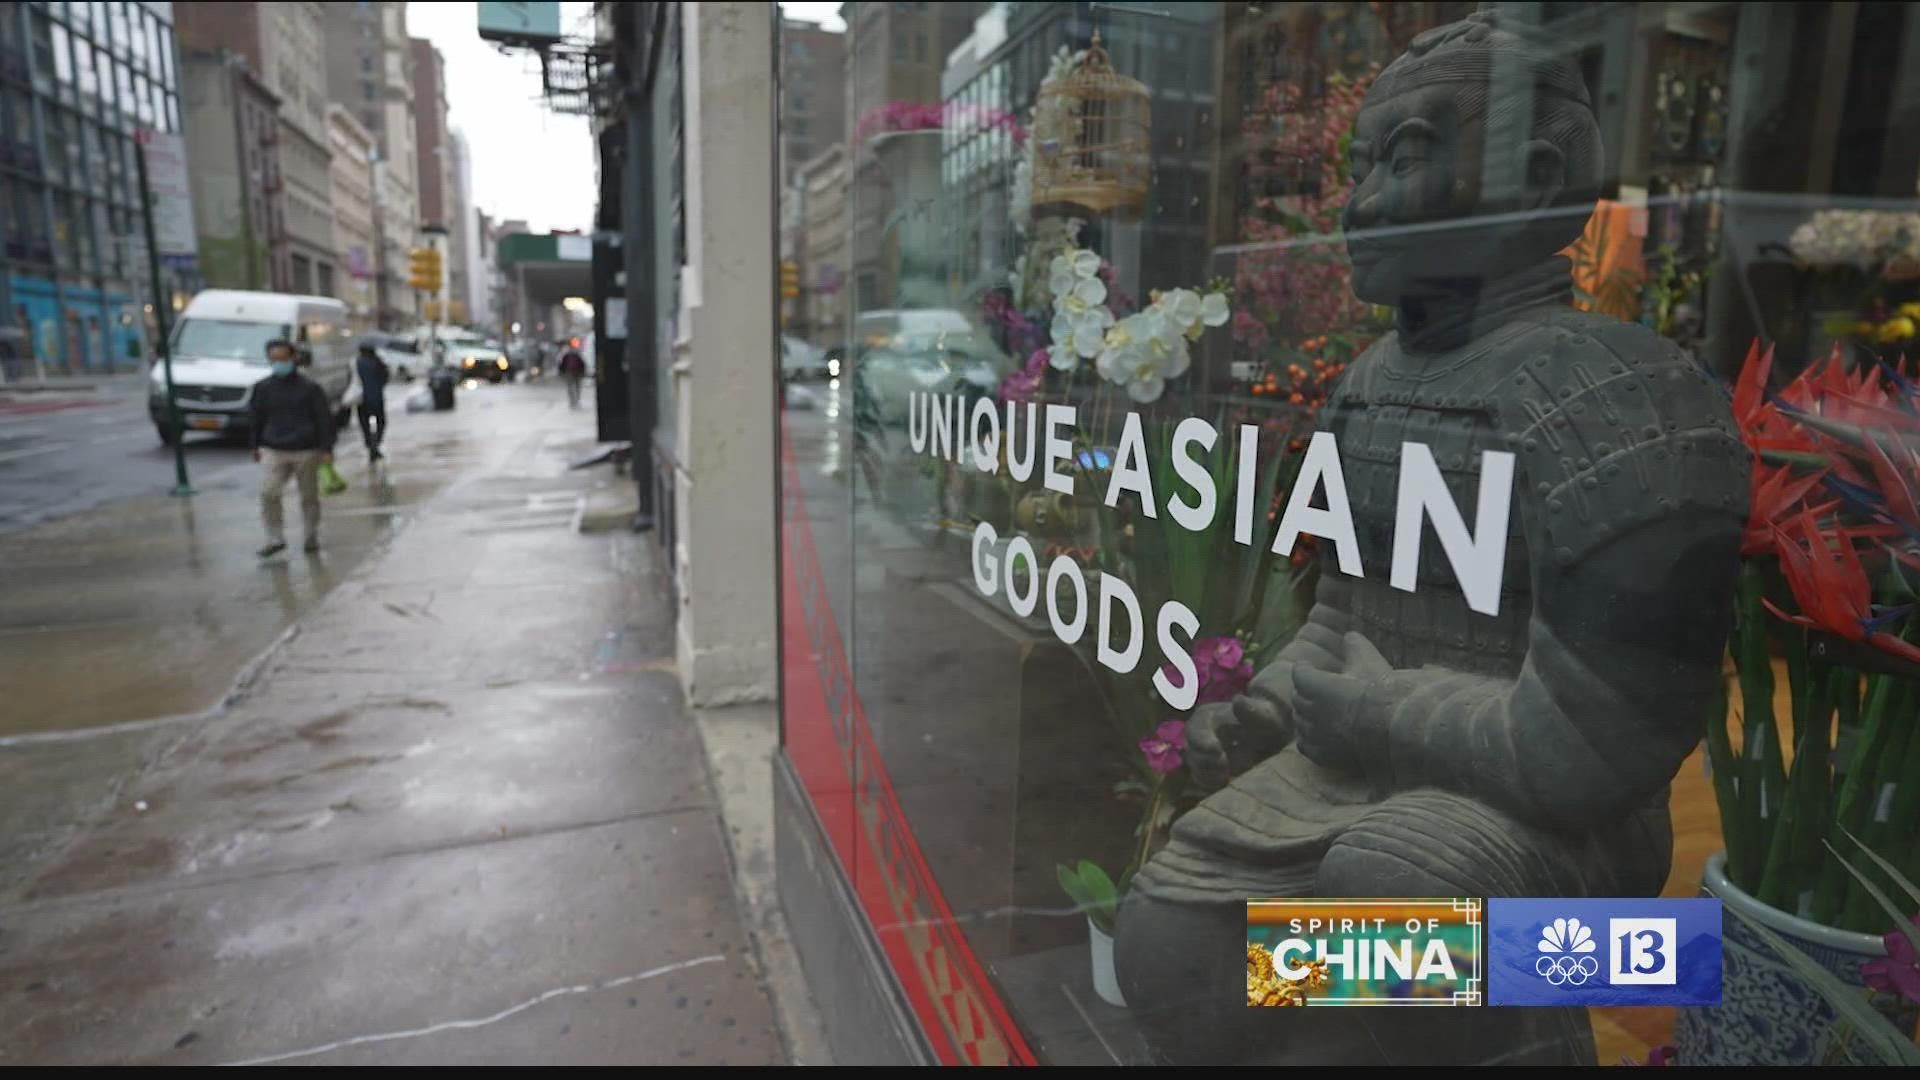 Leaders hope the easing of the pandemic will result in a business resurgence, prompting people to show some love in Chinatown and spend their money.